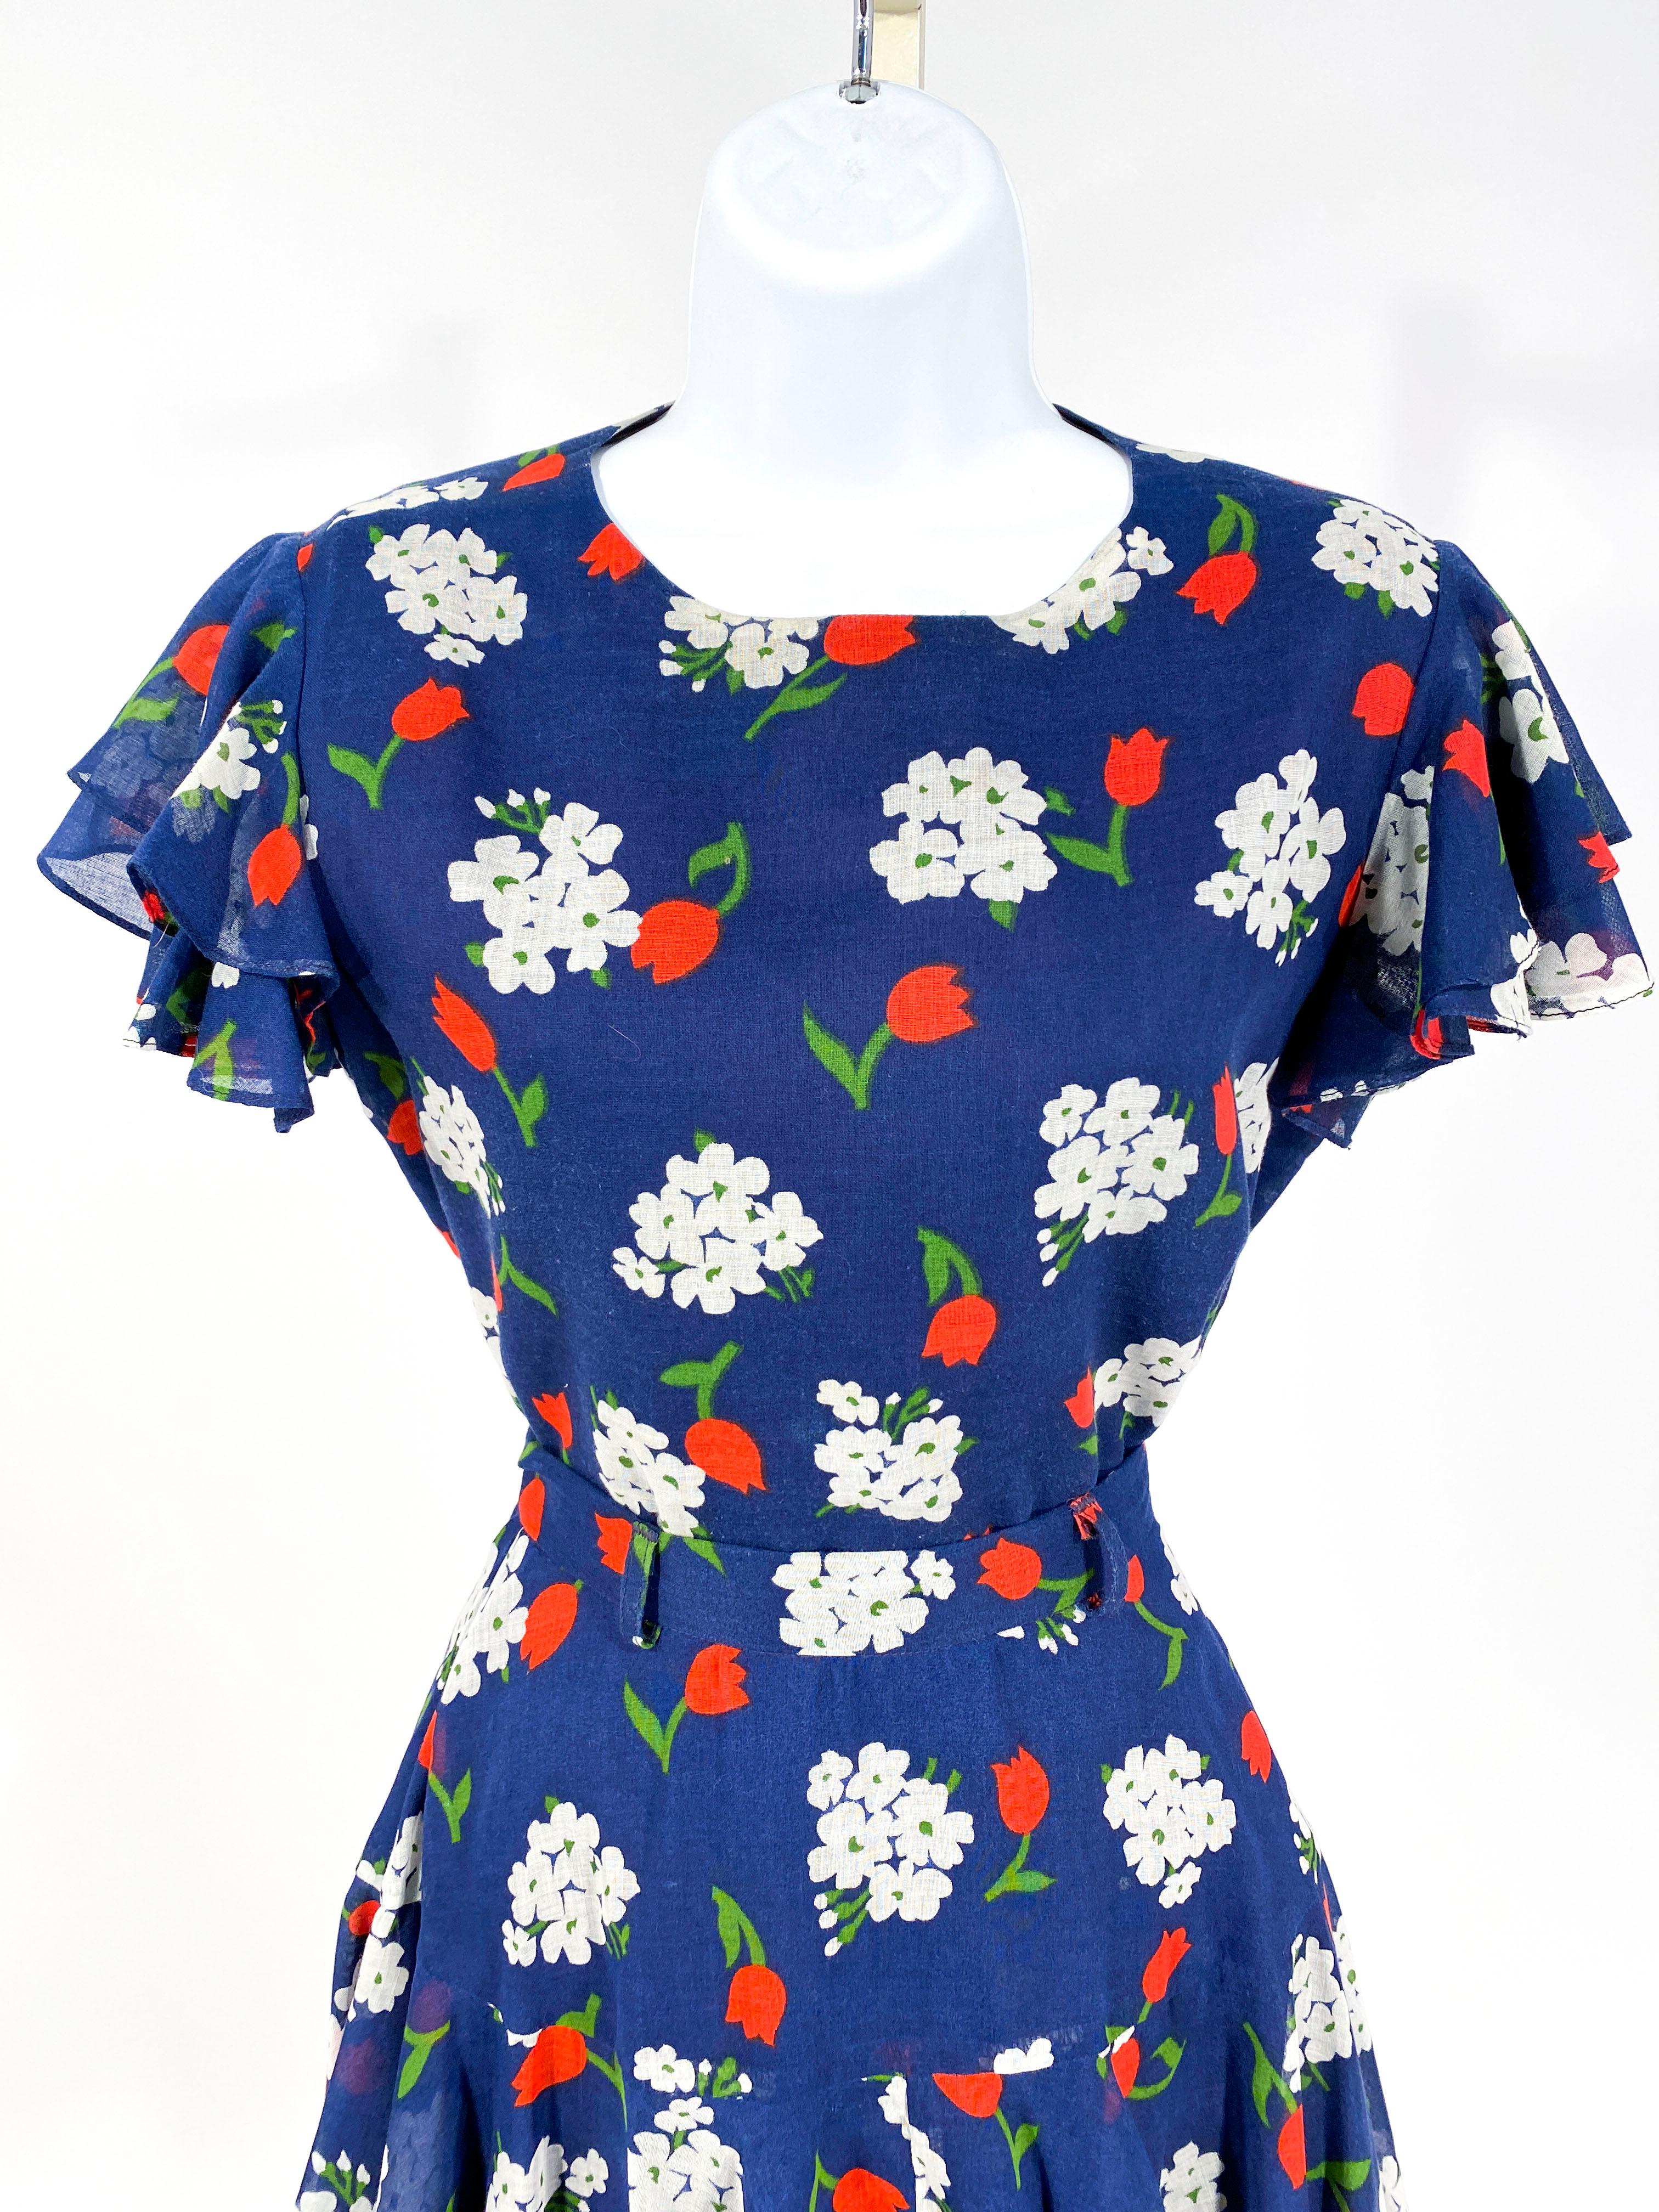 1970s two-piece (blouse and skirt) set featuring a red, white, and blue floral print. The shirt as layered ruffled short sleeves and is meant to be worn tucked into the skirt. The skirt has a fitted waist and begins to flare out below the hips. 